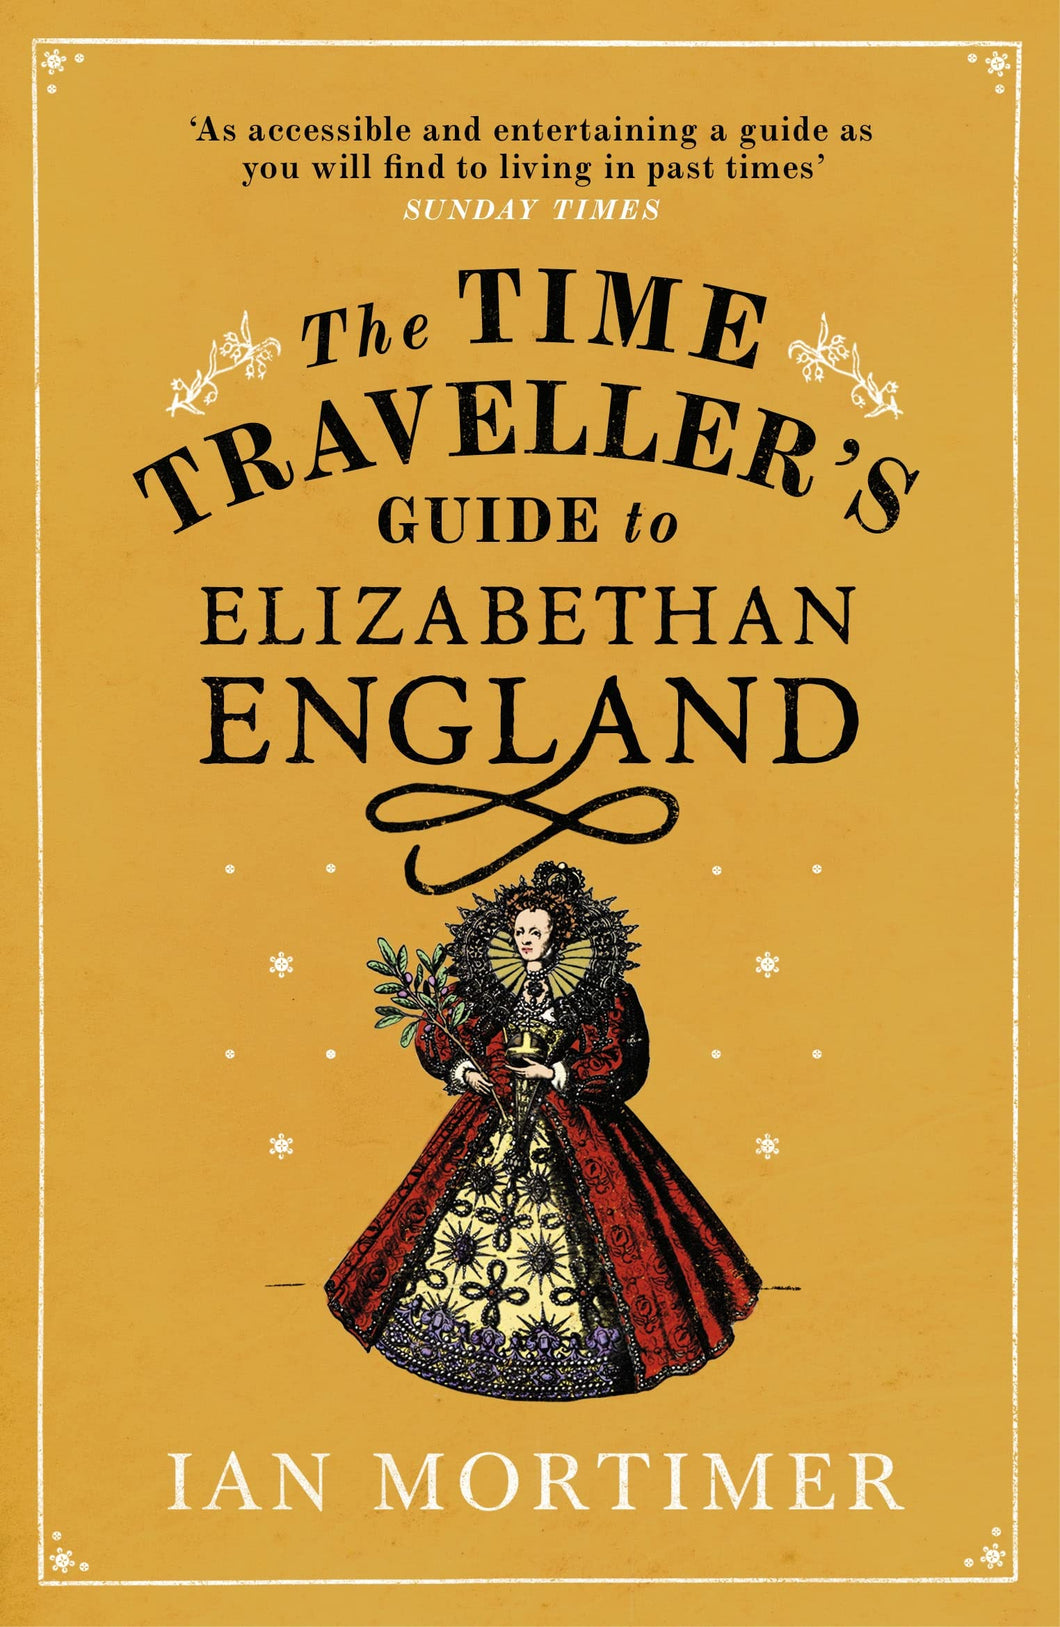 The Time Travellers Guide to Elizabethan England by Ian Mortimer